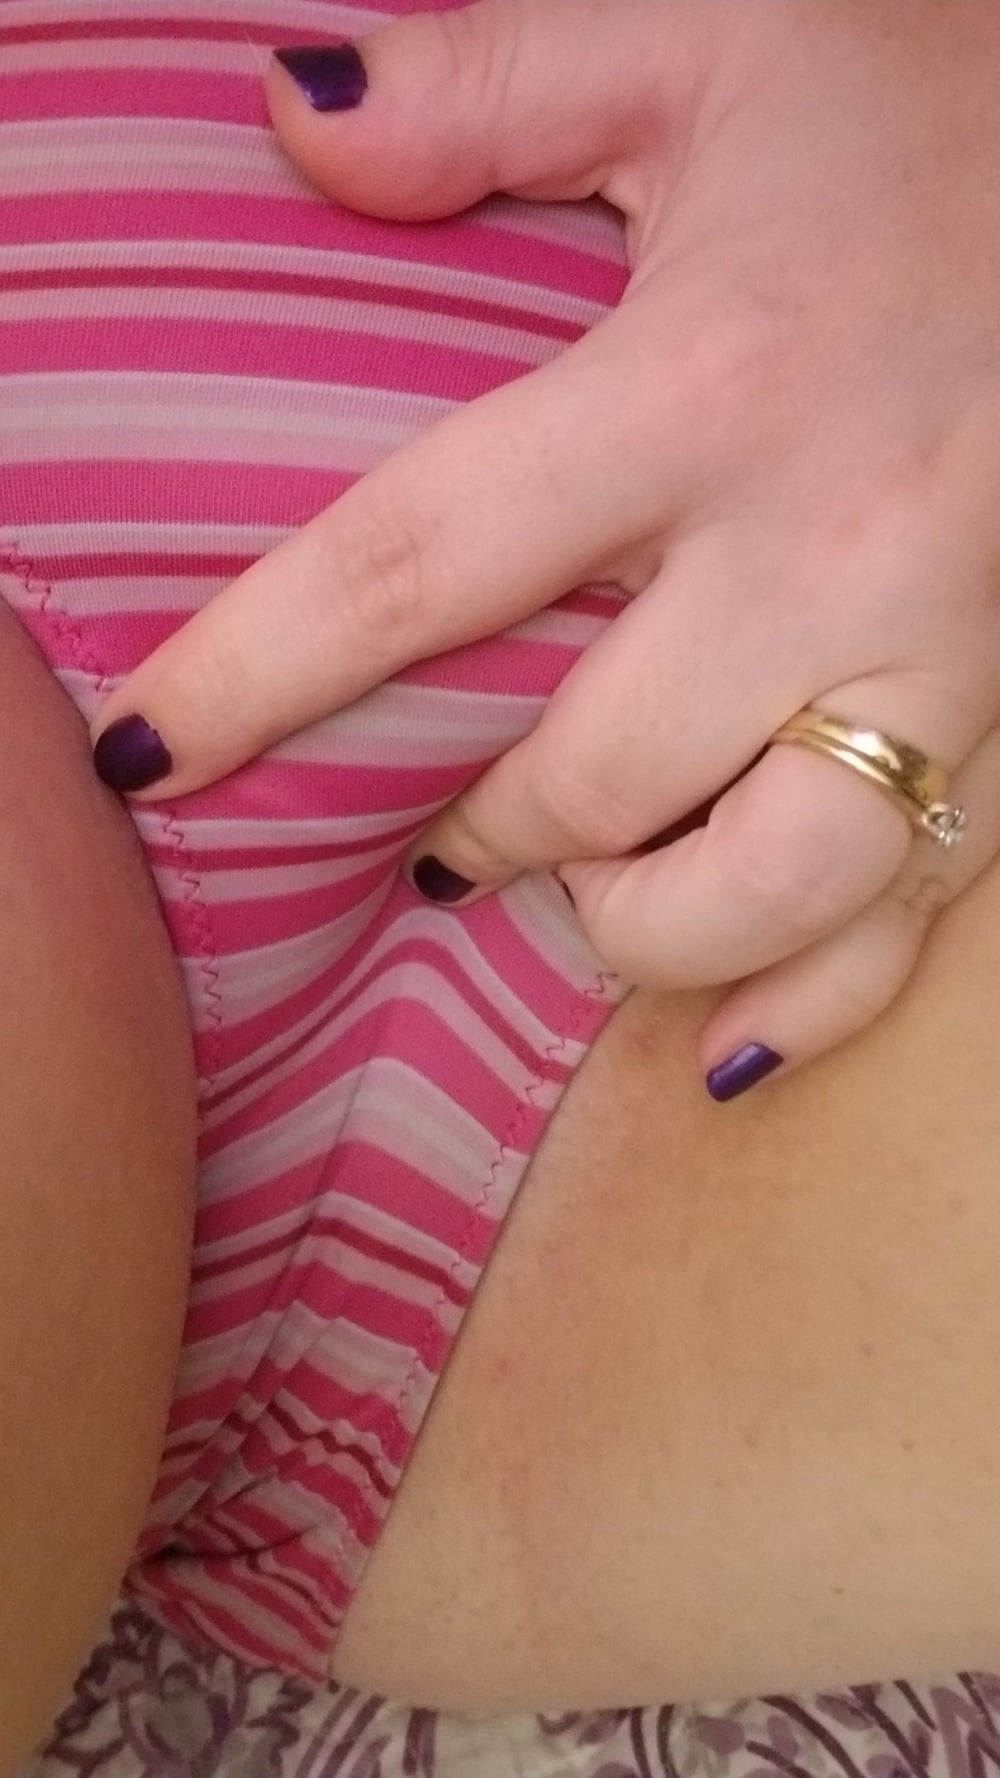 Afternoon Delight.... Pruned Fingers Of A Bored Housewife